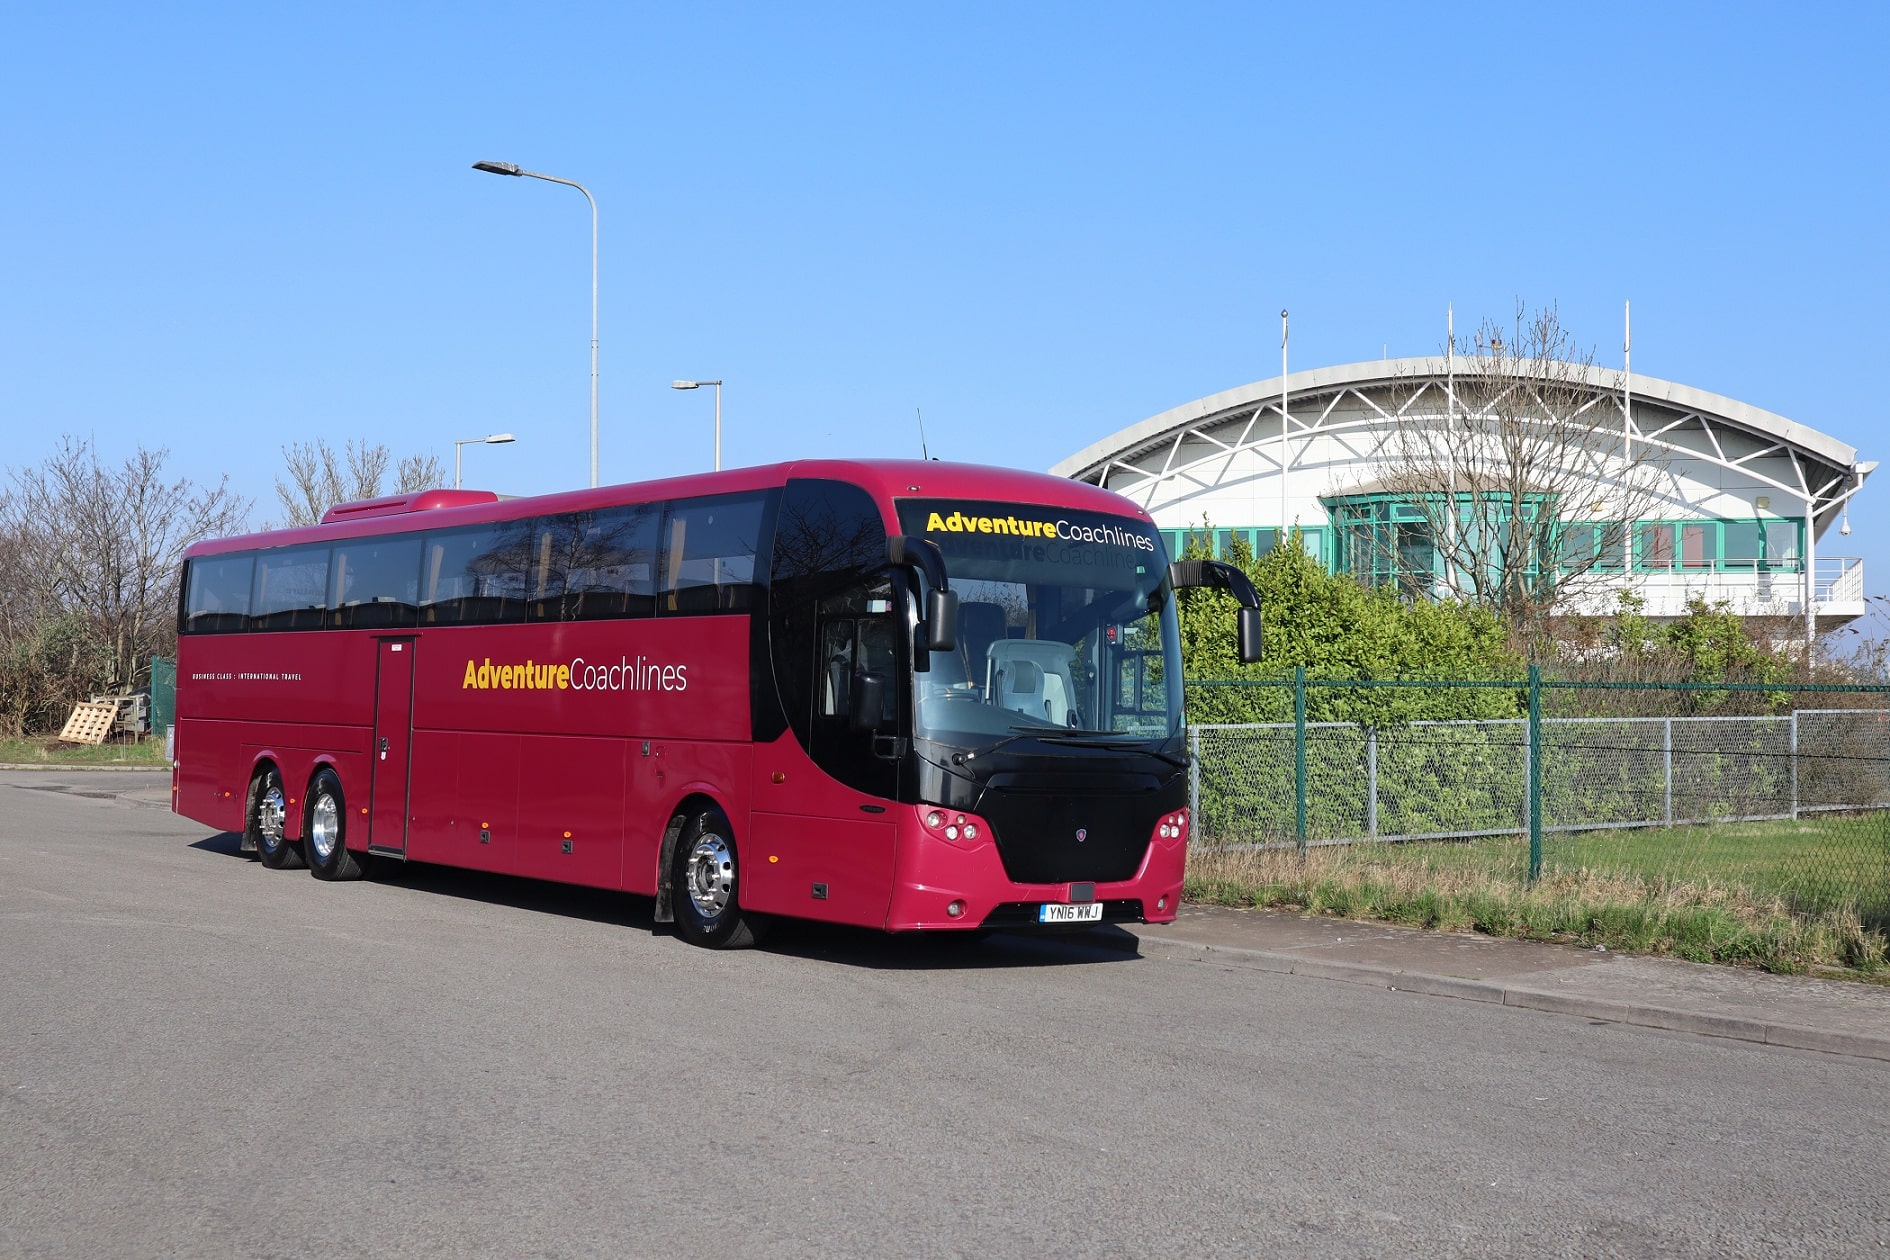 Coach hire rates should be reset from 2022 onwards